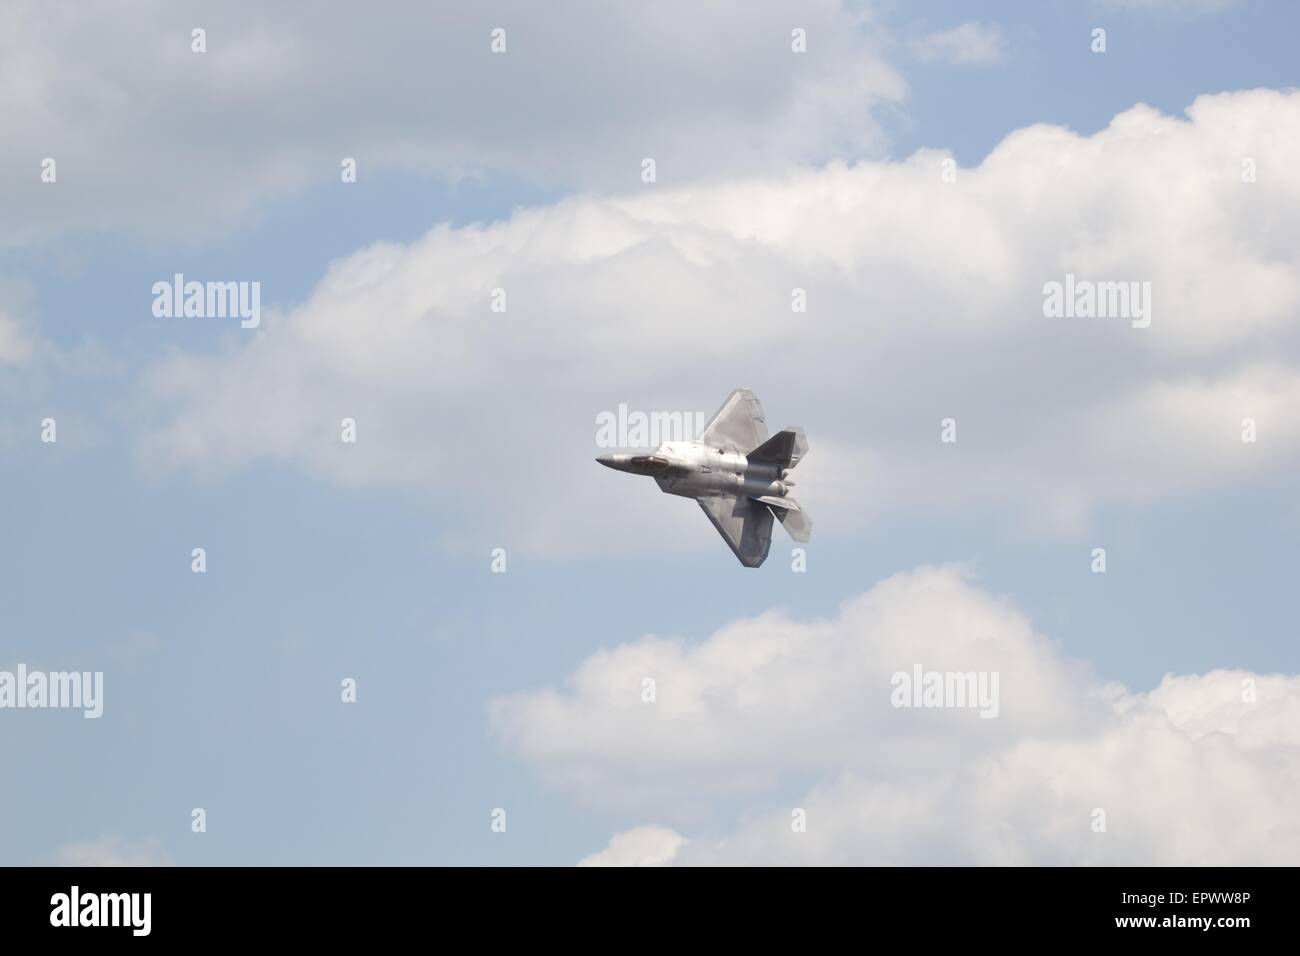 United States Air Force F 22A Raptor jet fighter dispaying at the Great New England Airshow, Westover Air Reserve Base, 2015 Stock Photo